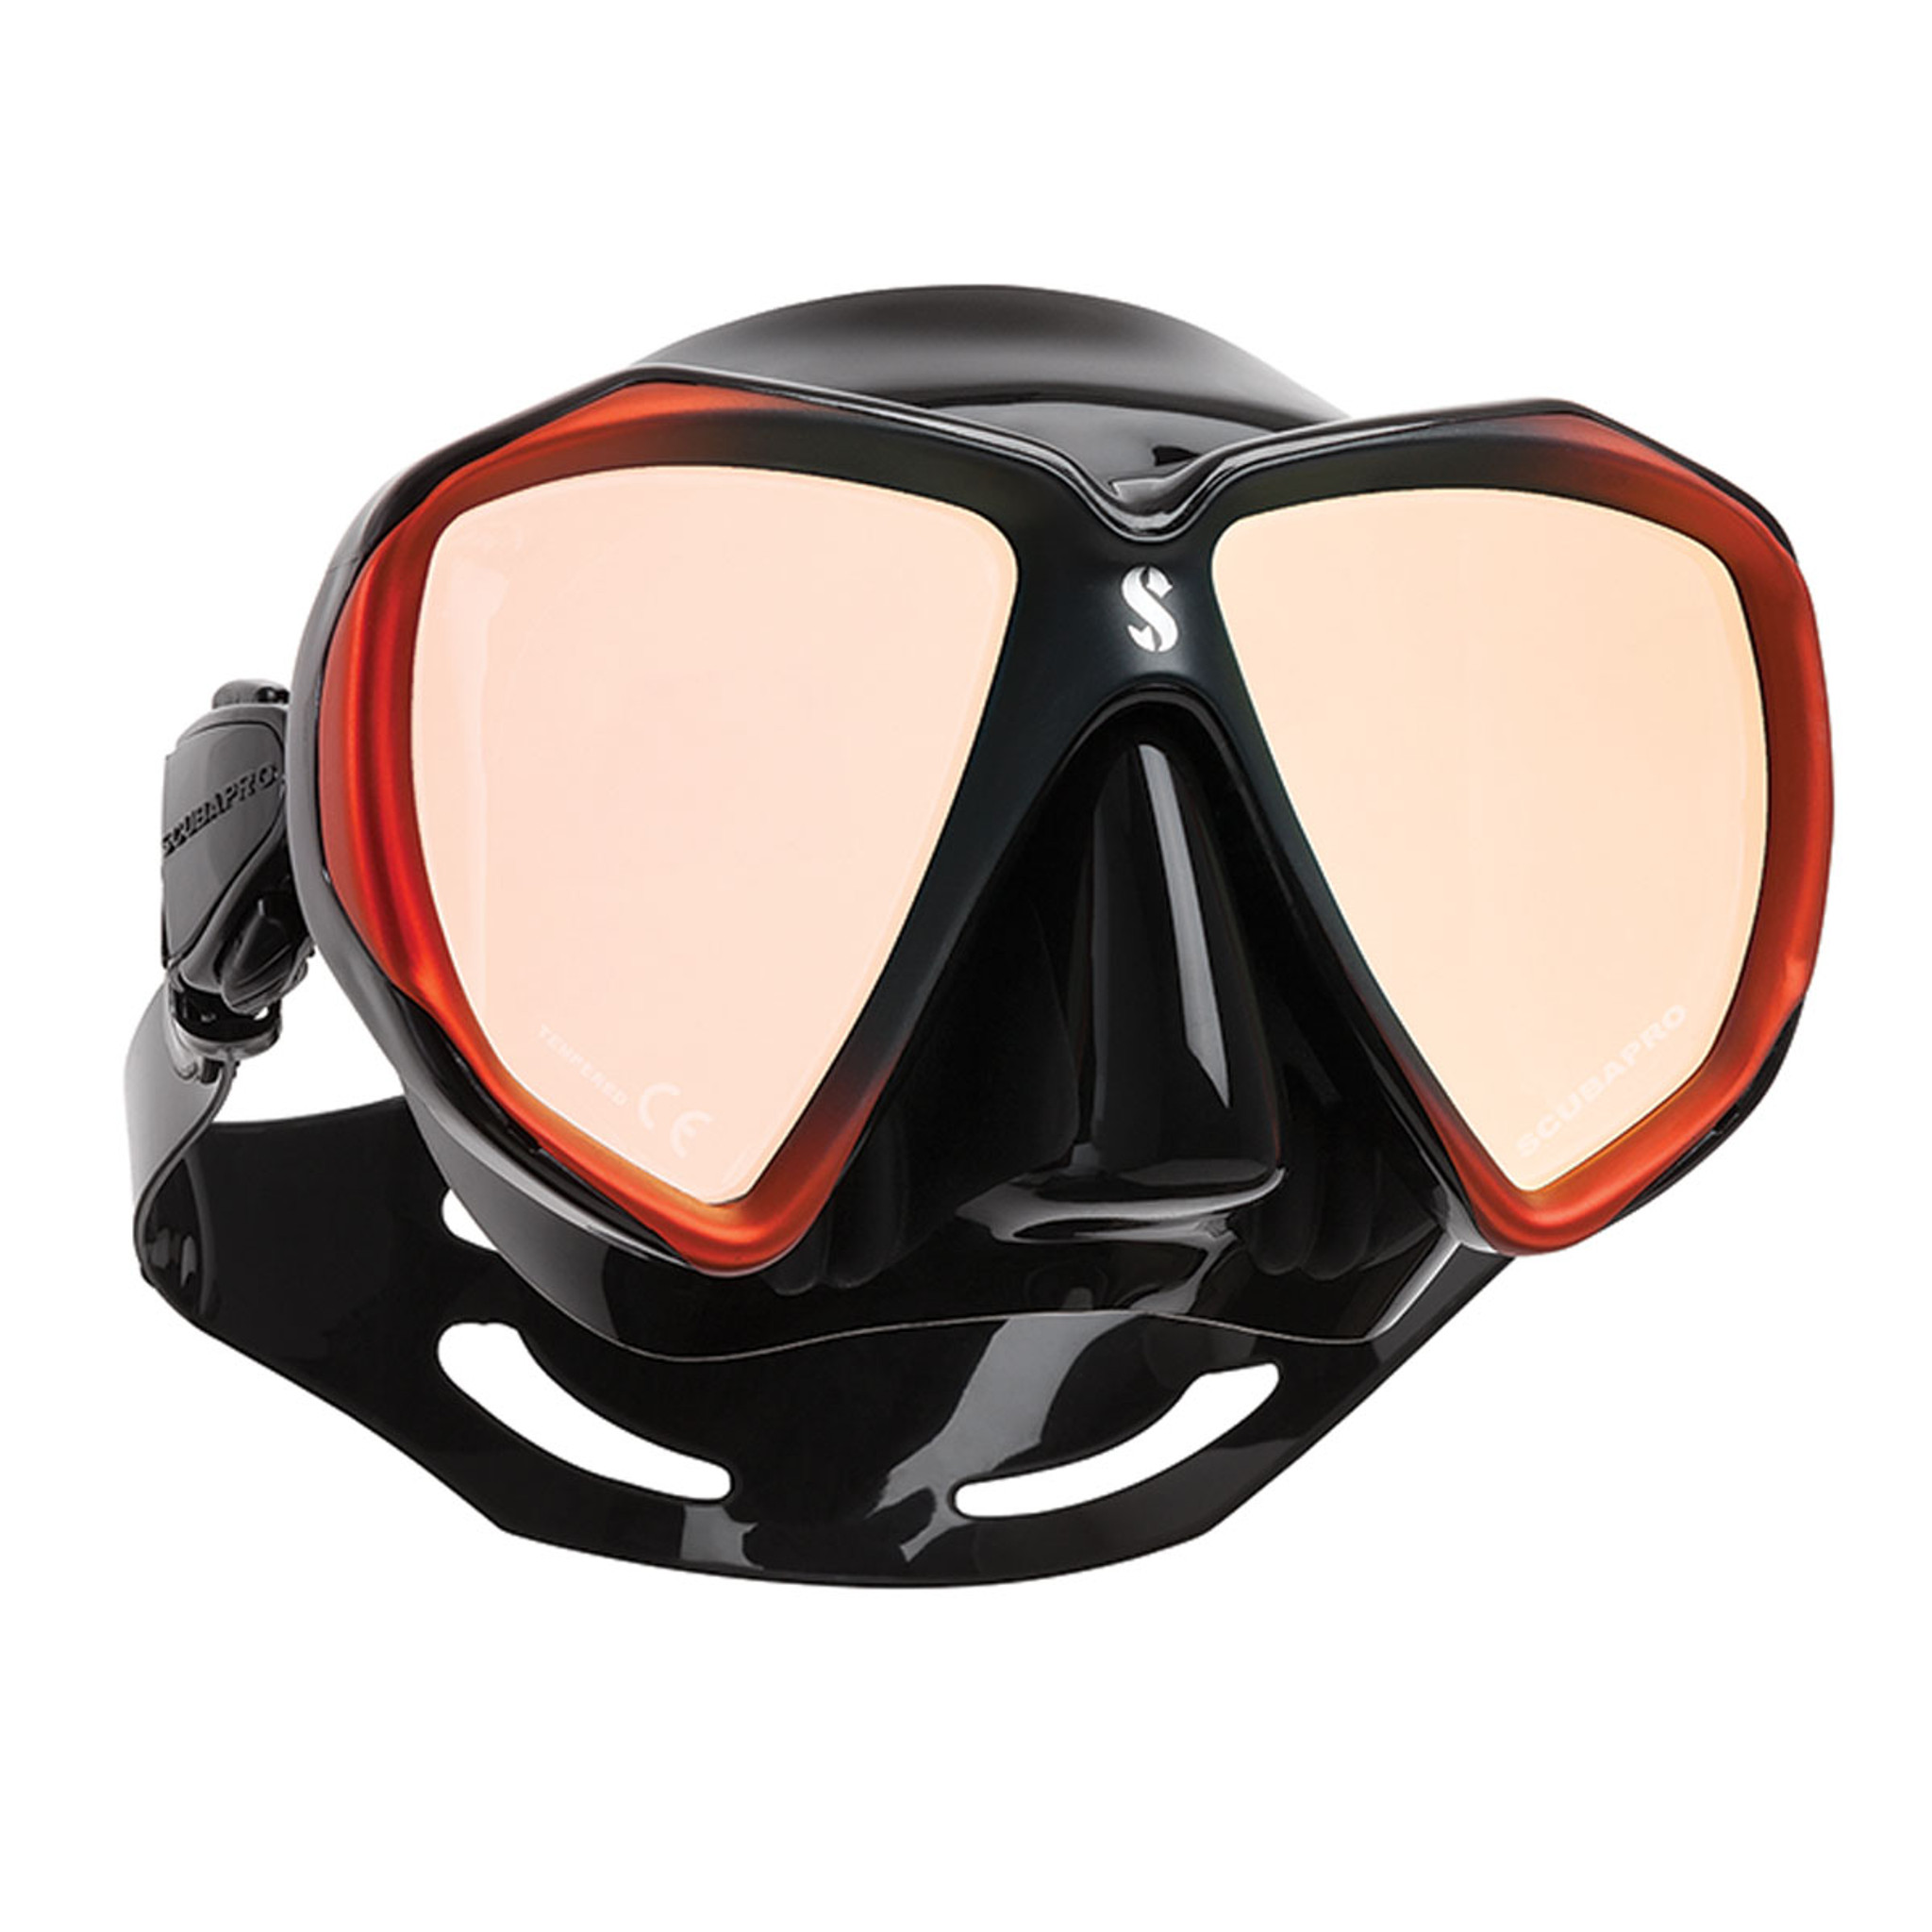 SPECTRA DIVE MASK, MIRRORED